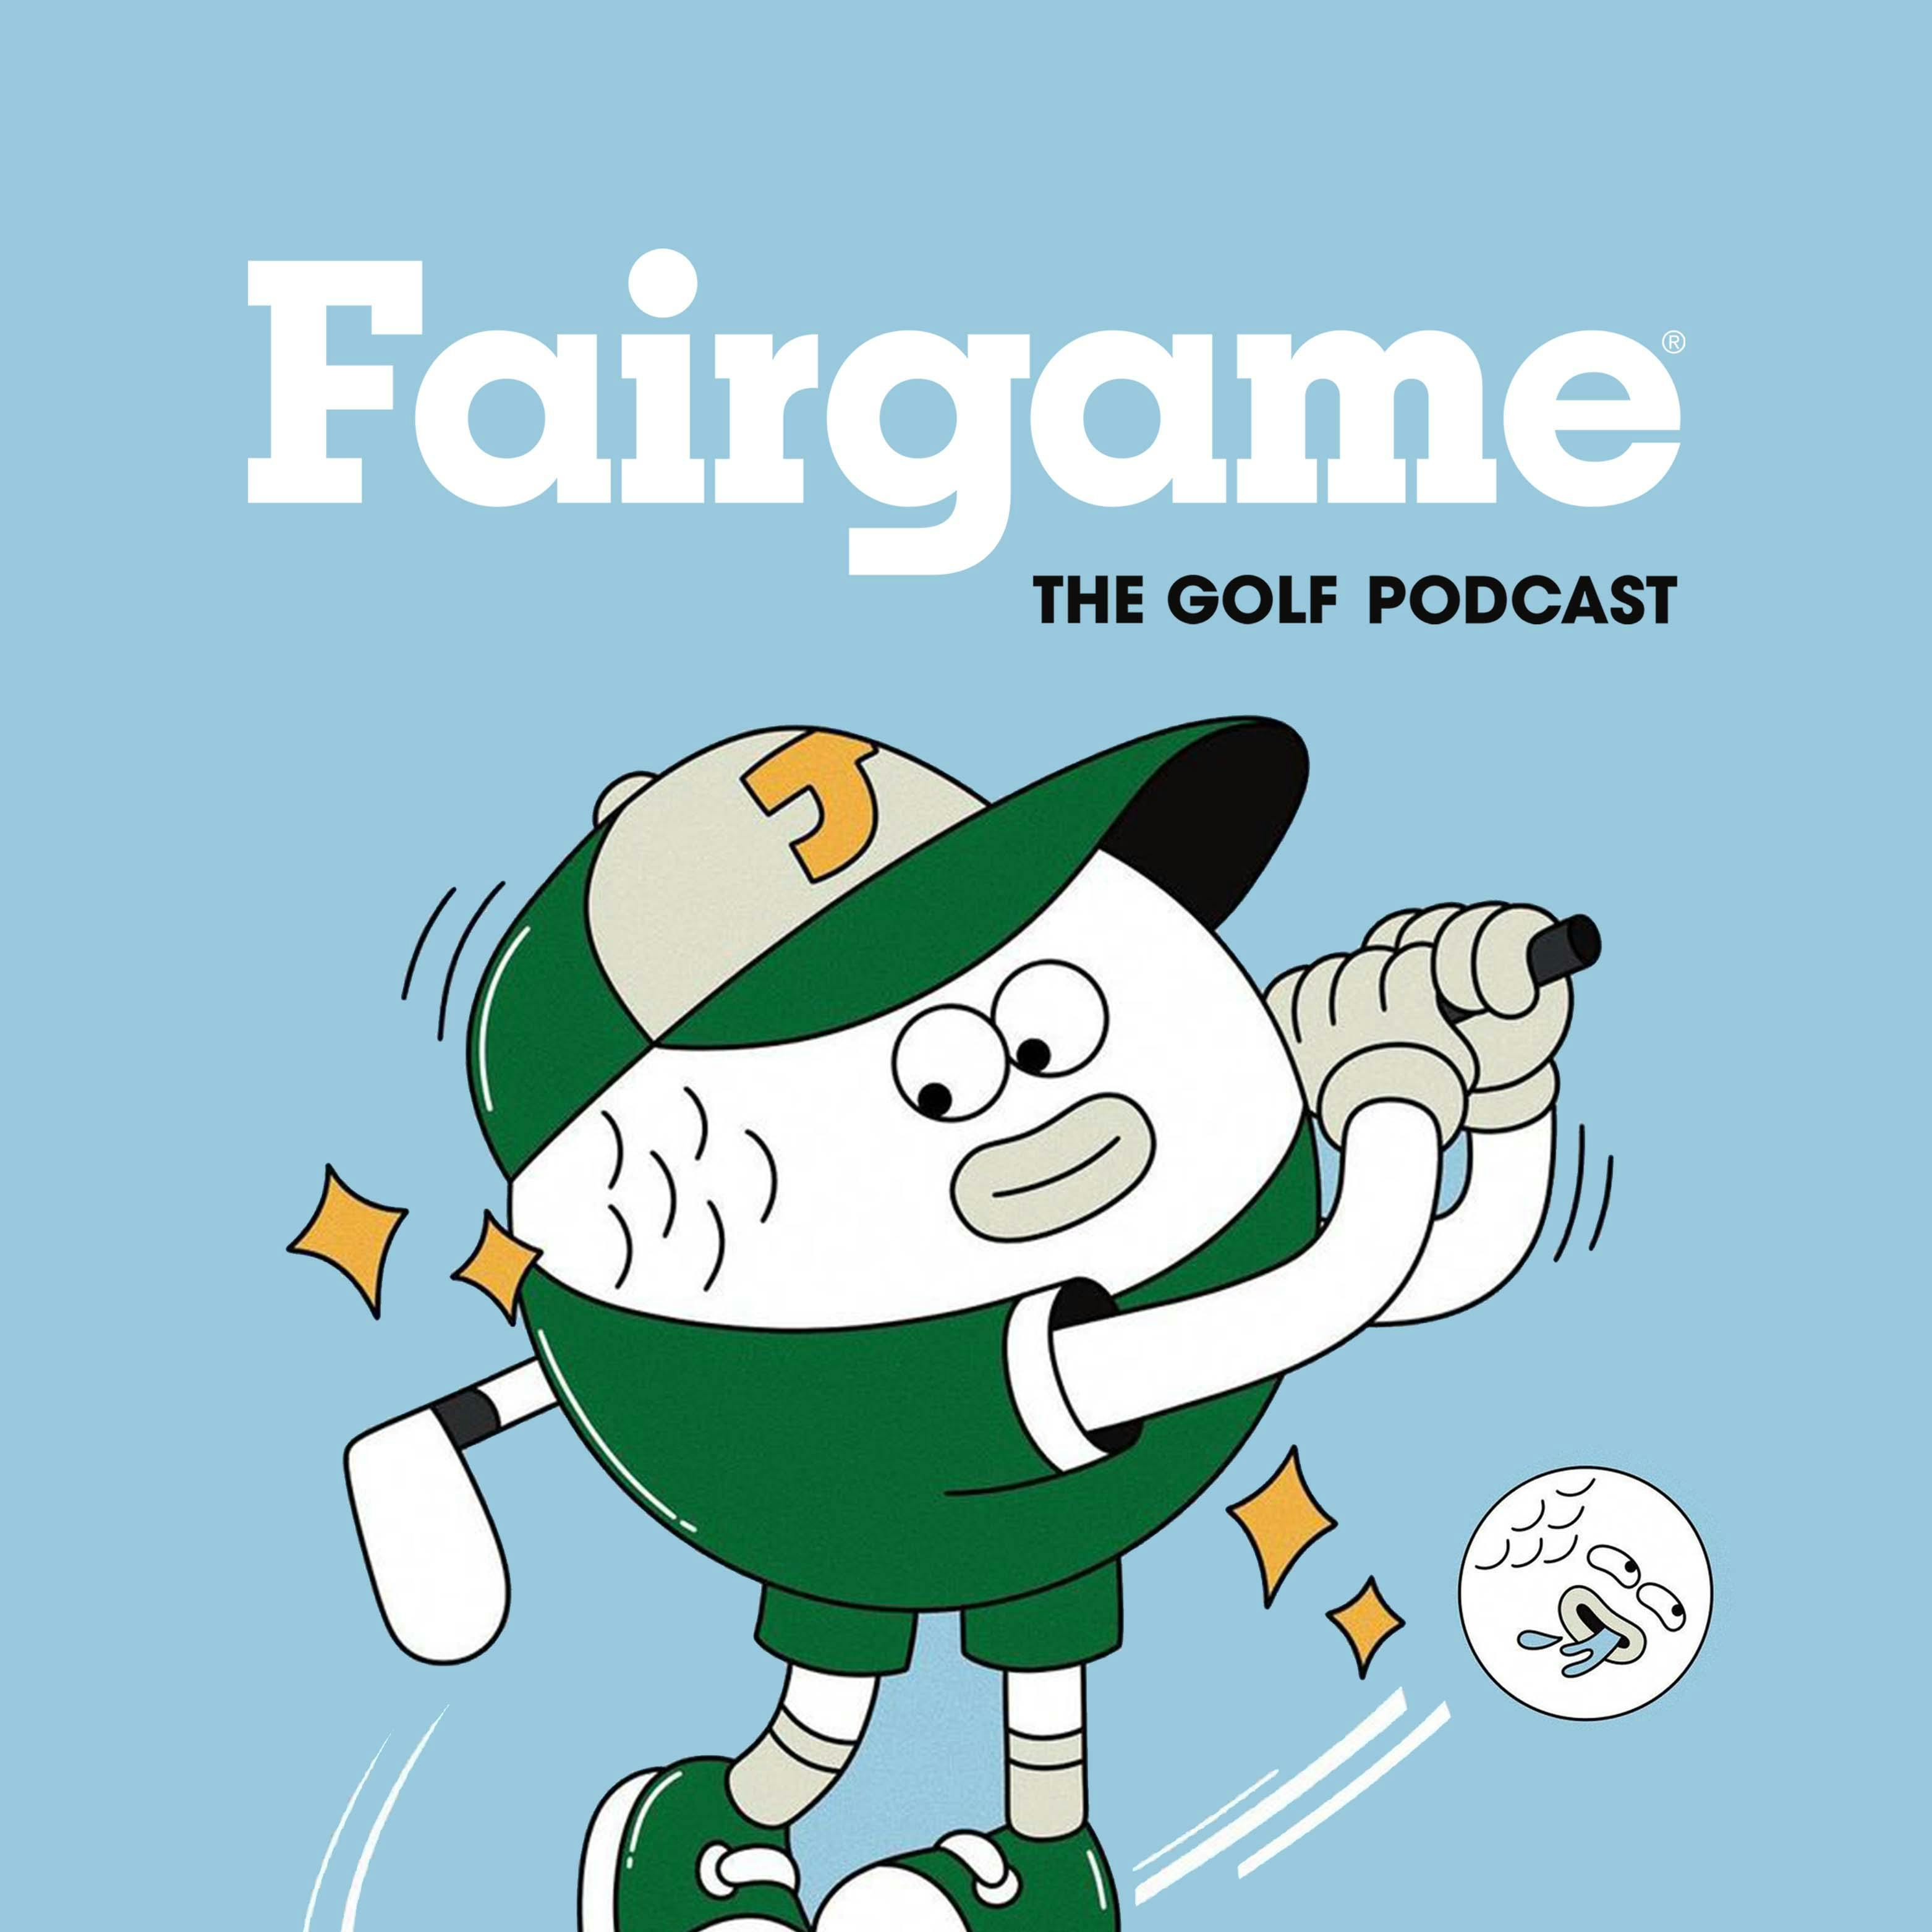 Episode 32: Getting to Know Golf's Emerging Brands